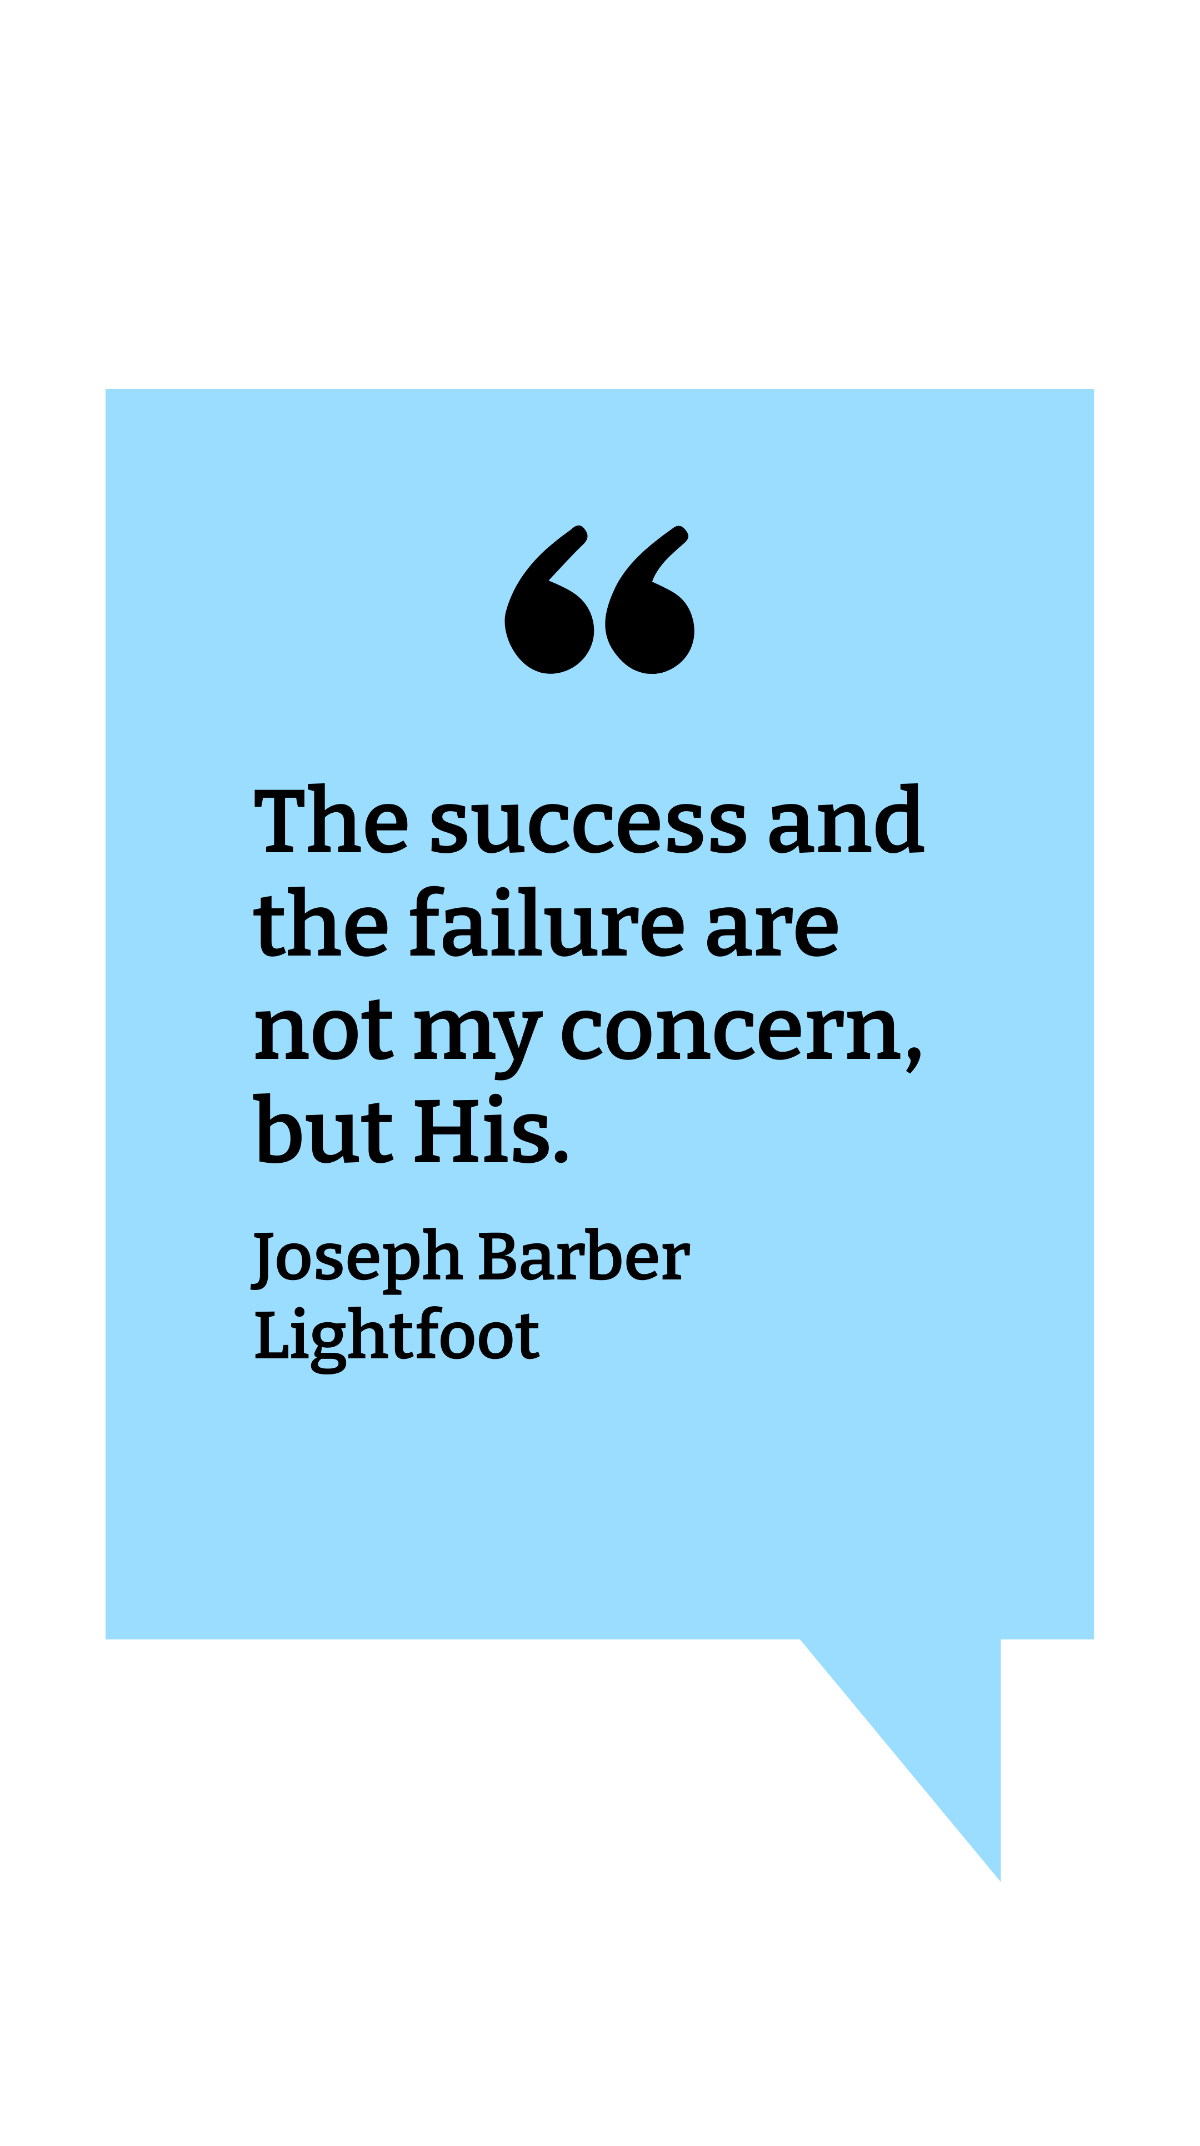 Joseph Barber Lightfoot - The success and the failure are not my concern, but His. Template